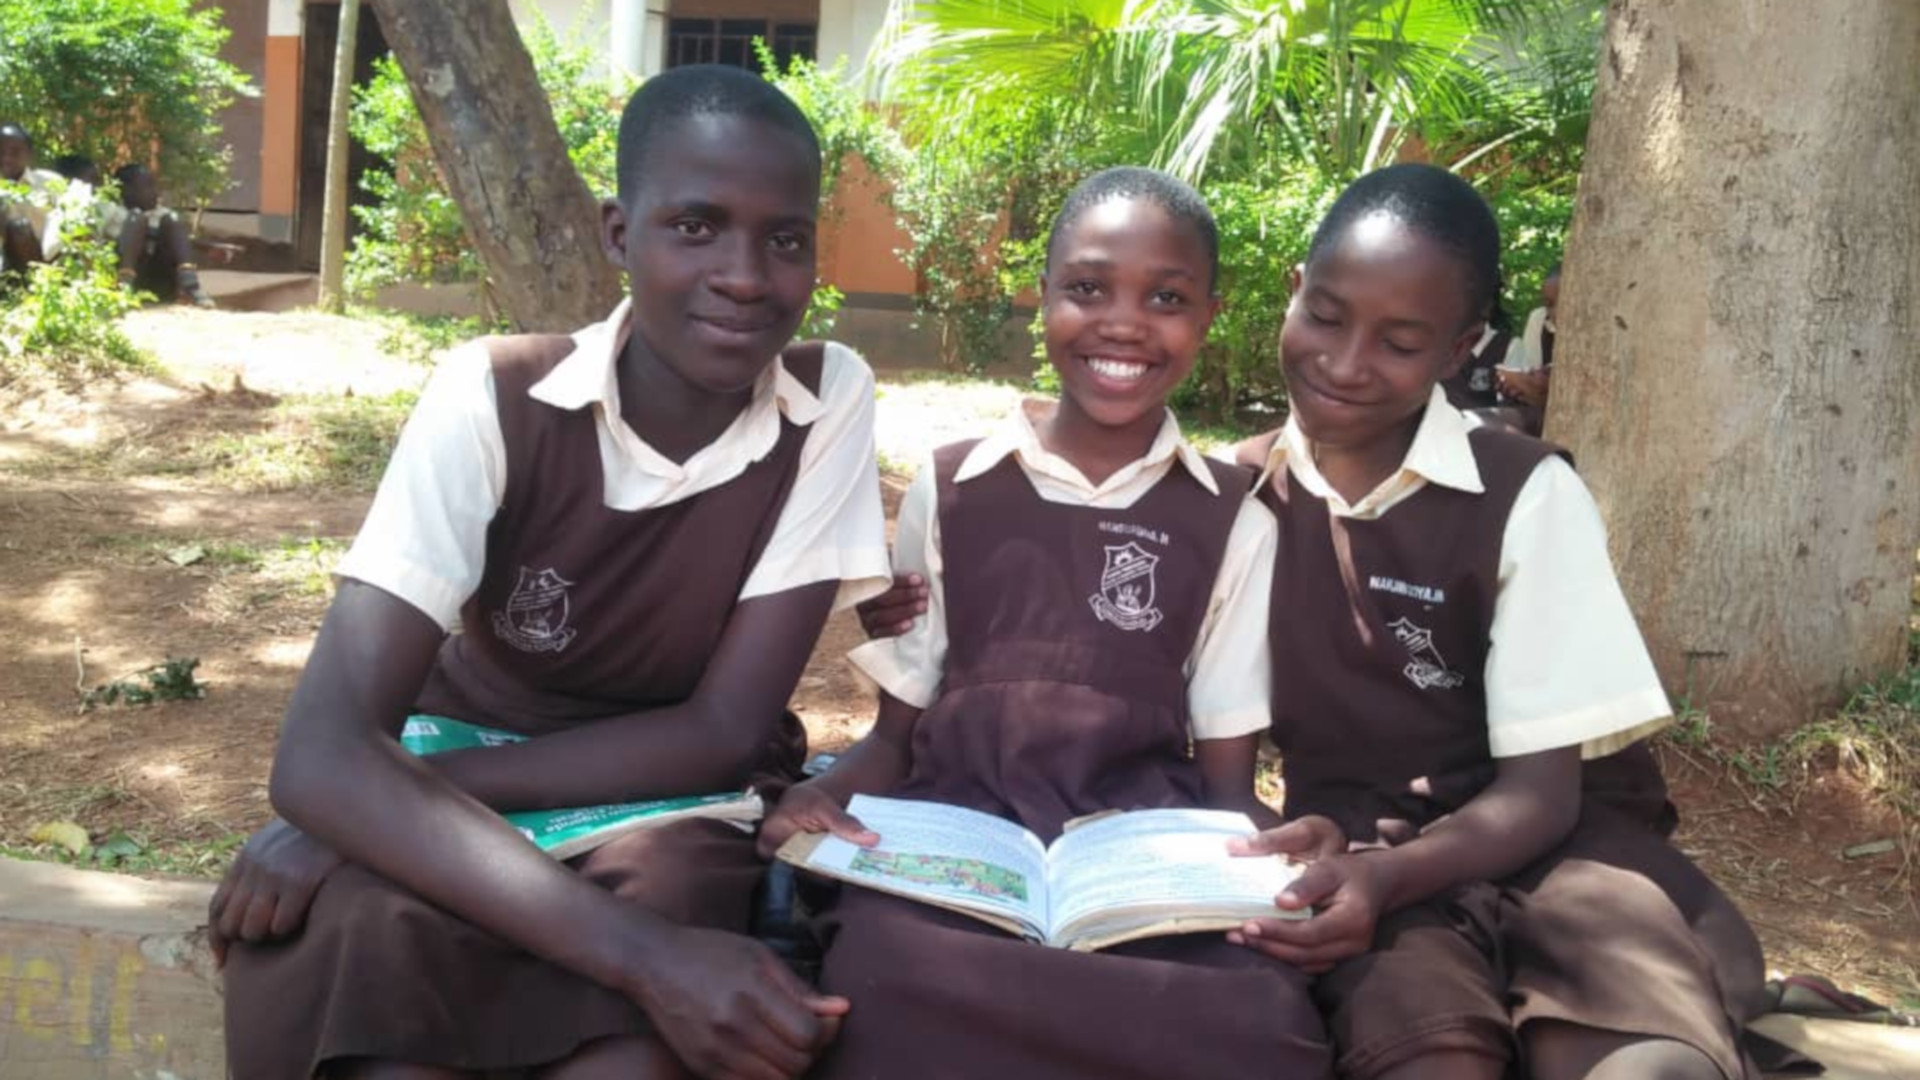 Primary Six girls reading story books